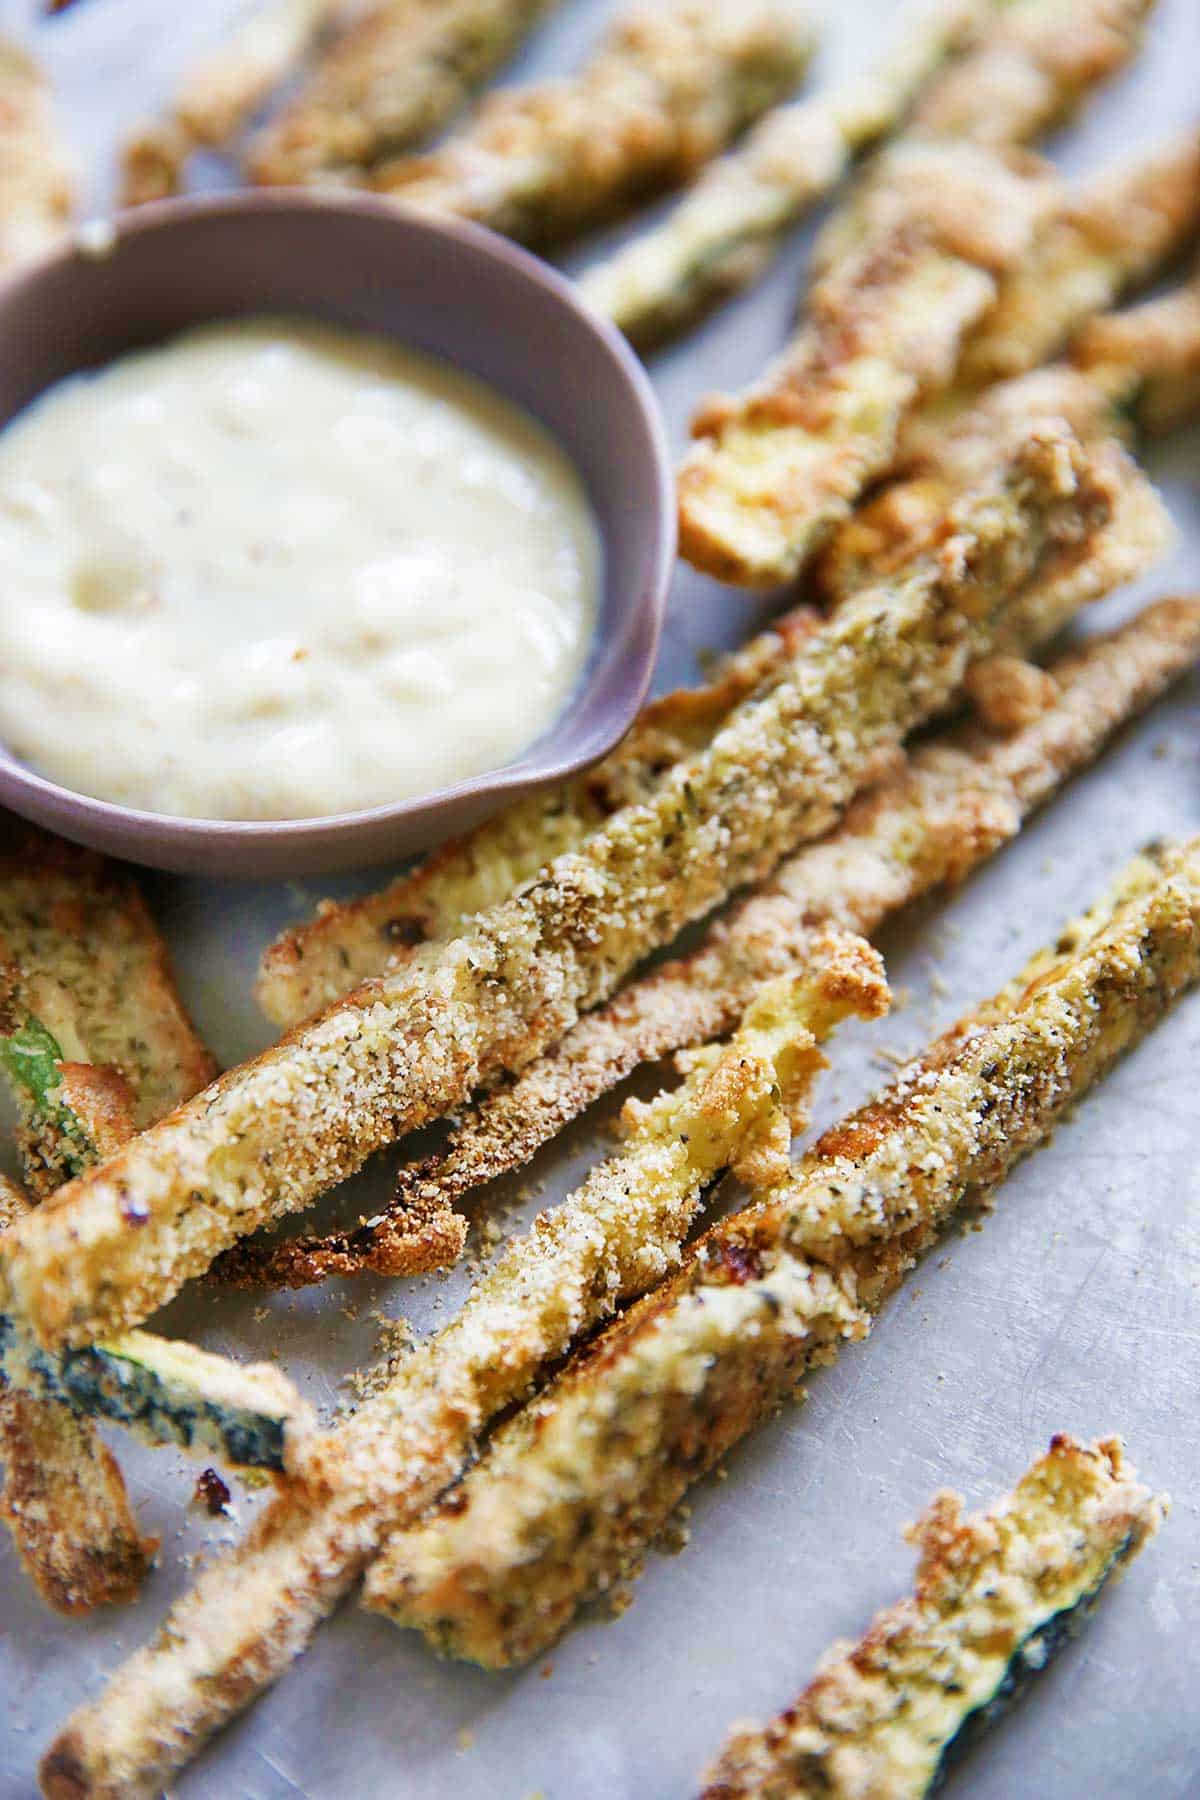 Paleo Zucchini Fries with dipping sauce